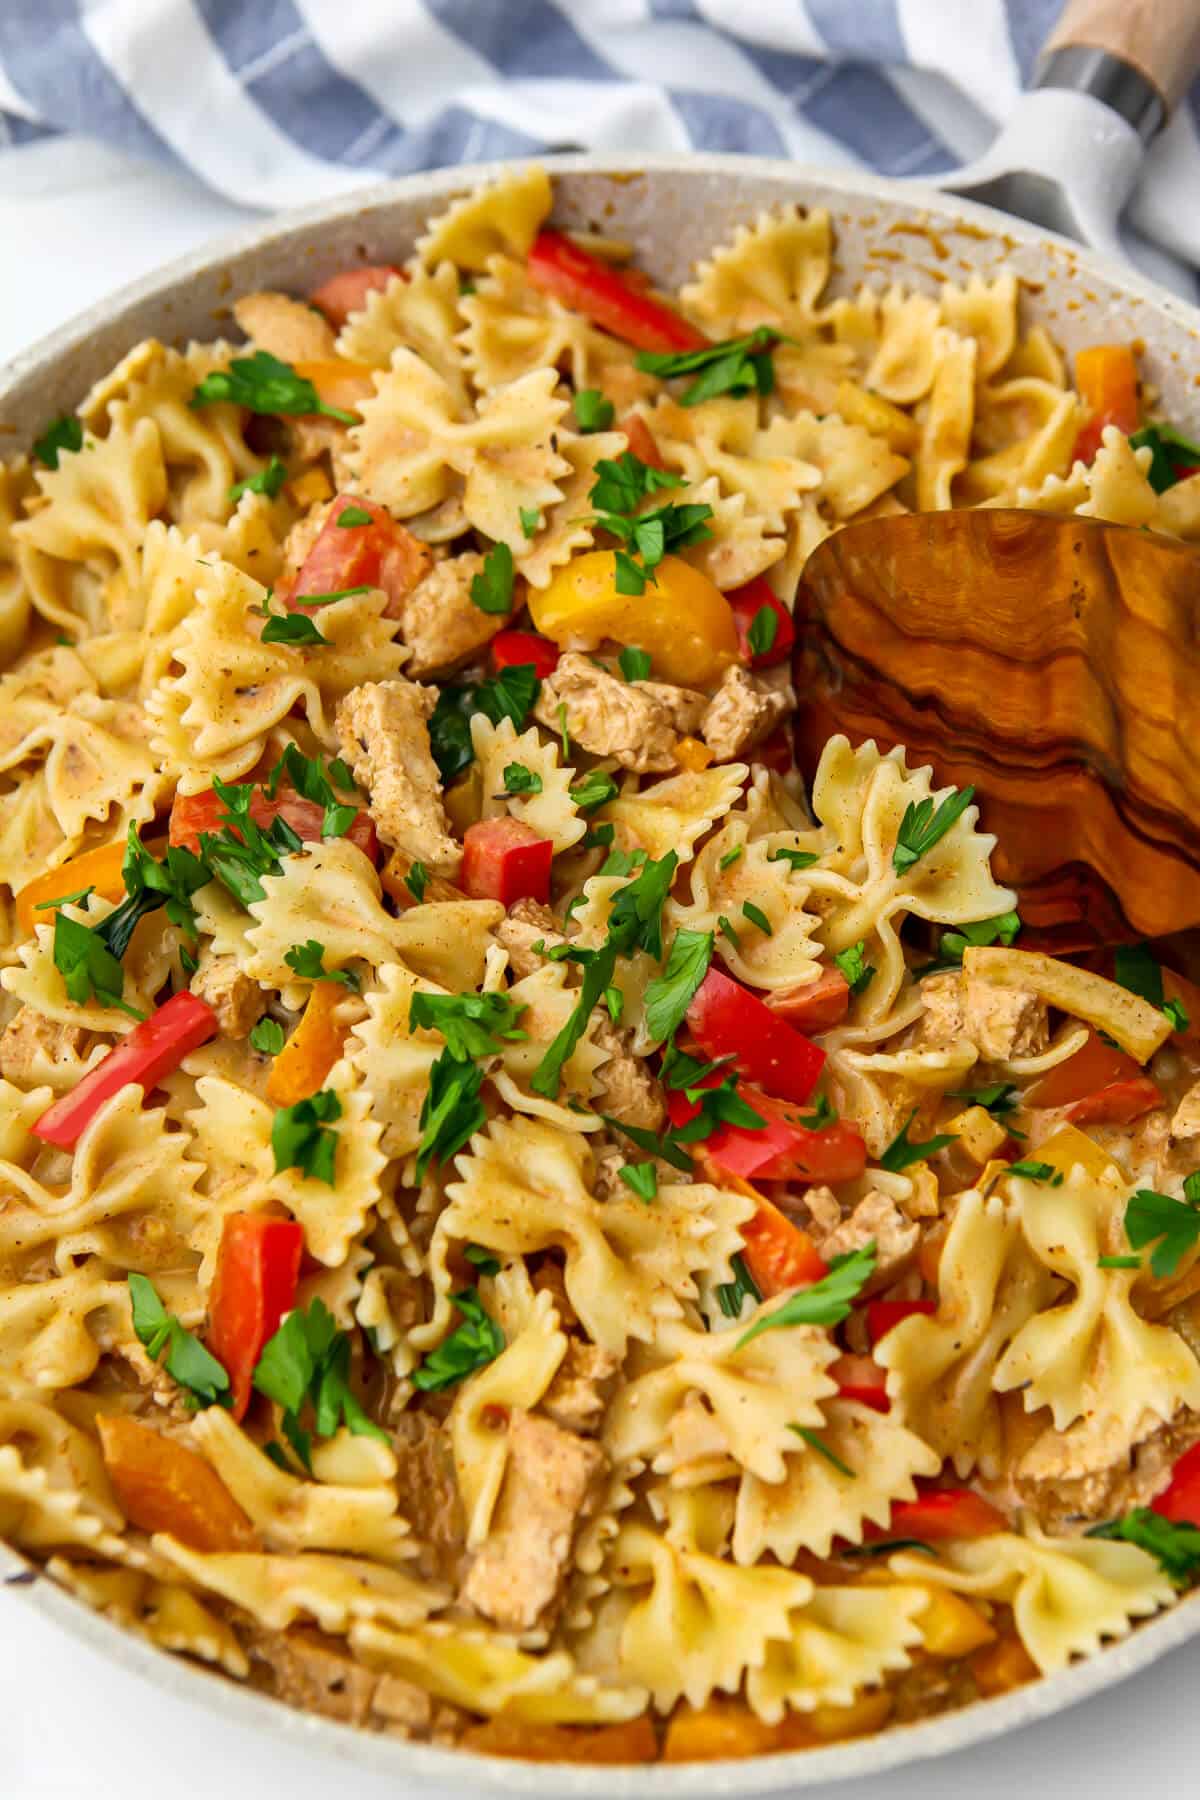 Bow tie pasta cooked with colorful bell peppers and green onion in a creamy jerk sauce.